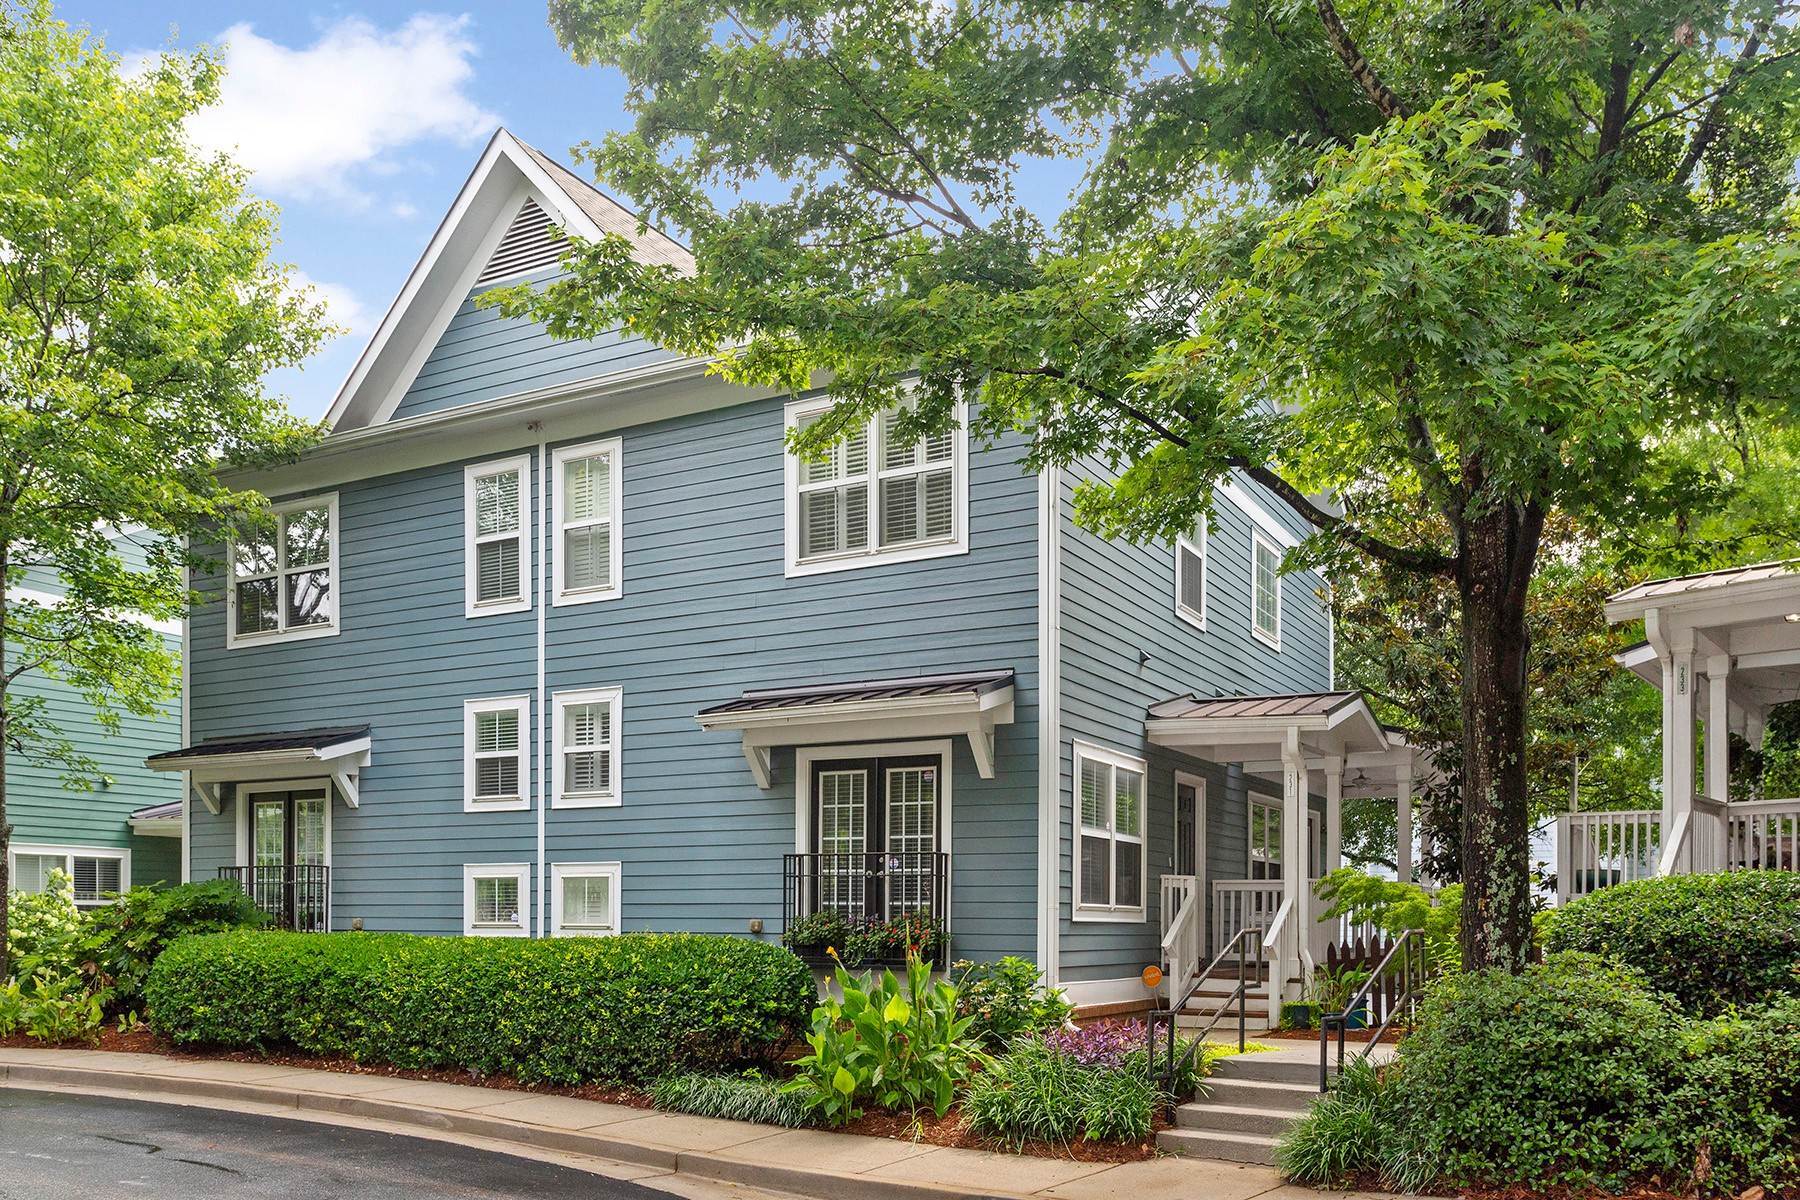 Townhouse for Sale at Enjoy Your Covered Porch From This Highly Desirable Townhome In Carlyle Park 231 Carlyle Park Drive Atlanta, Georgia 30307 United States